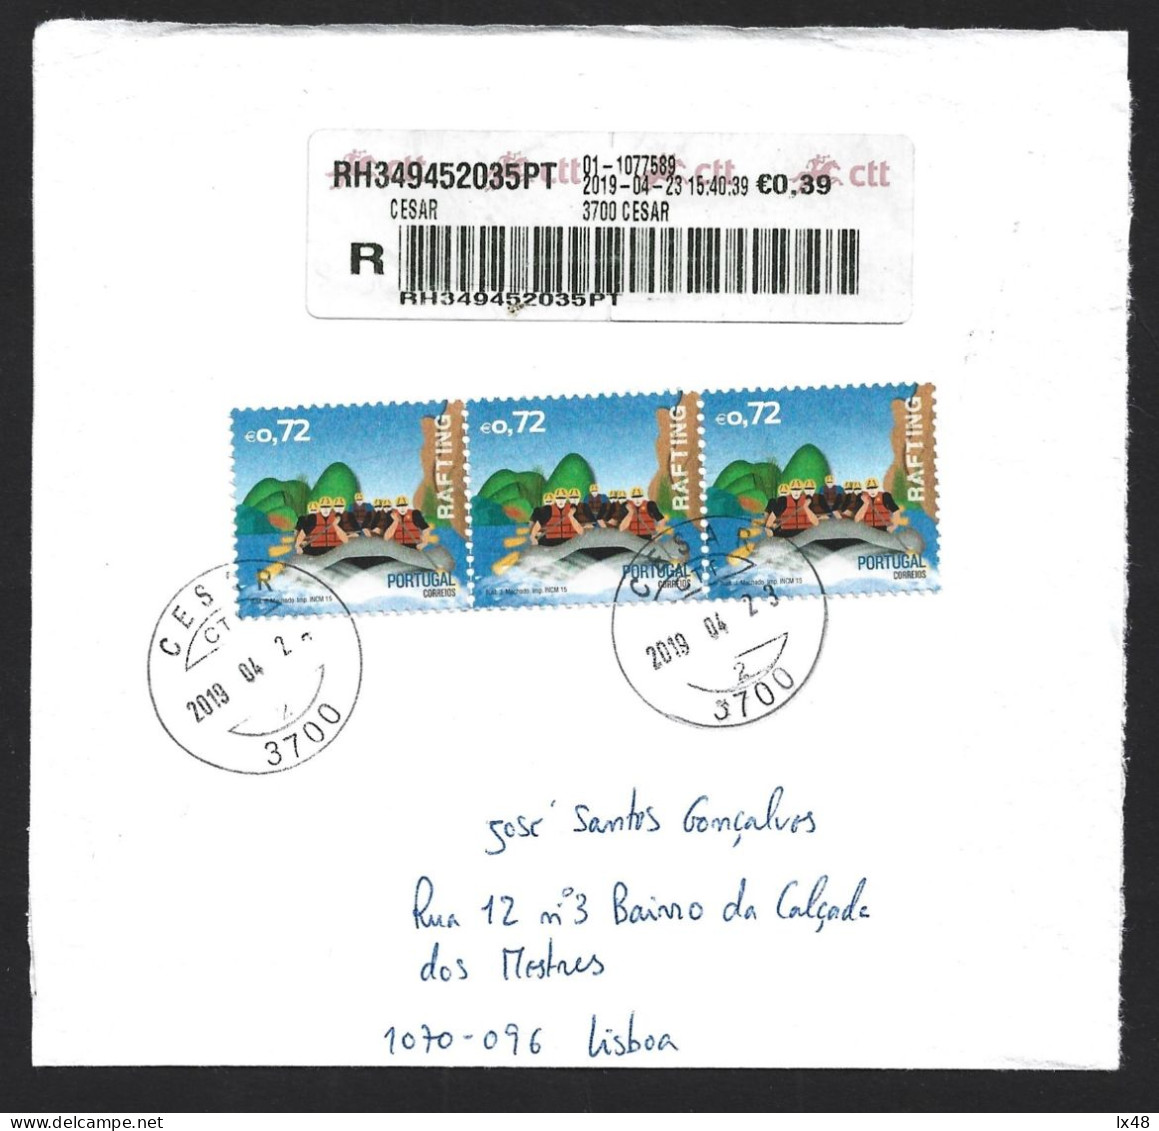 Rafting. Registered Letter From César, Oliveira De Azemeis, With 3 Rafting Stamps. Water.  Rafting. Raften. Rafting. - Rafting